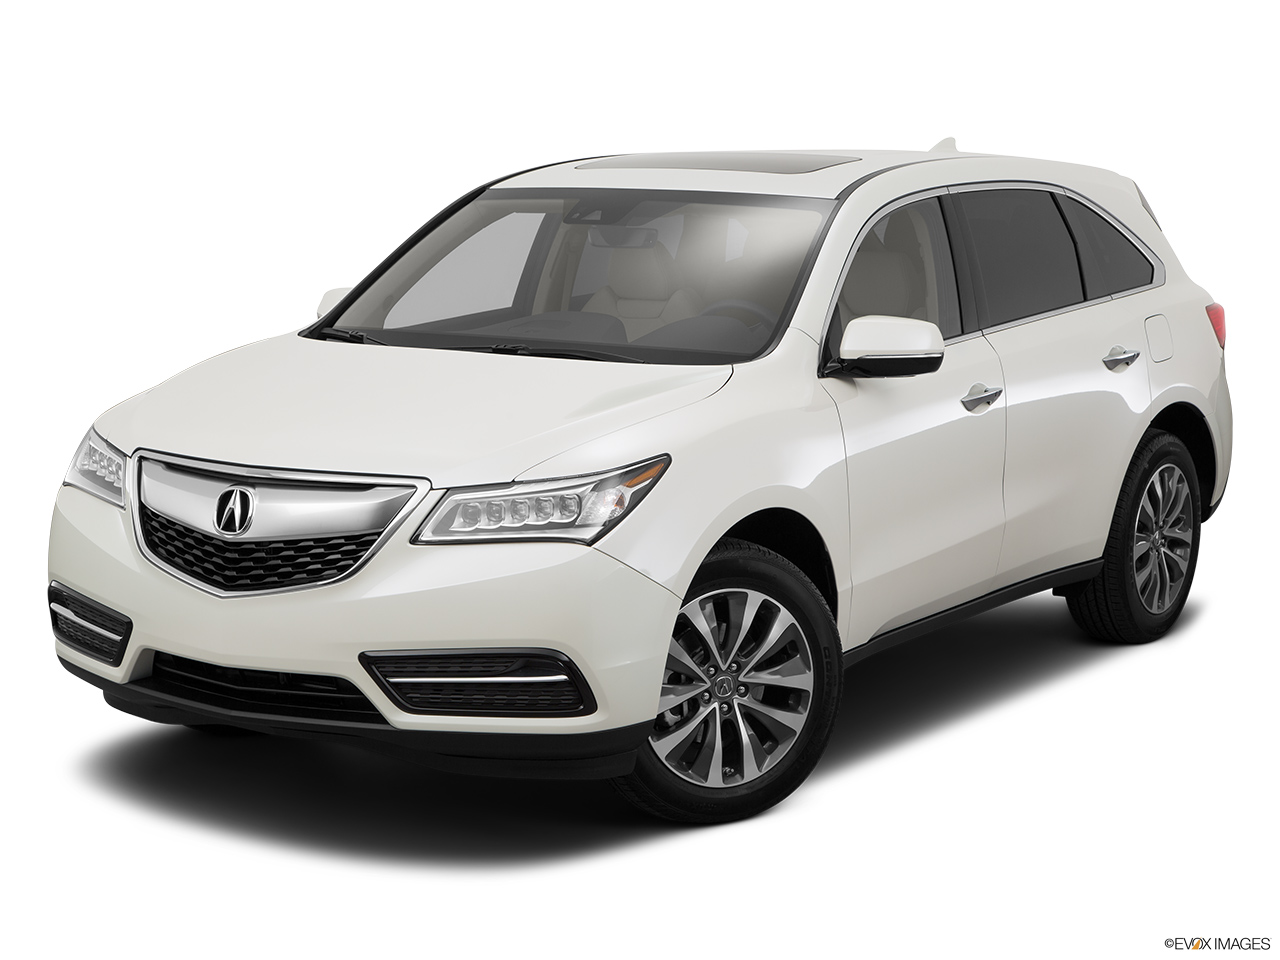 2016 Acura MDX SH-AWD Front angle view. 